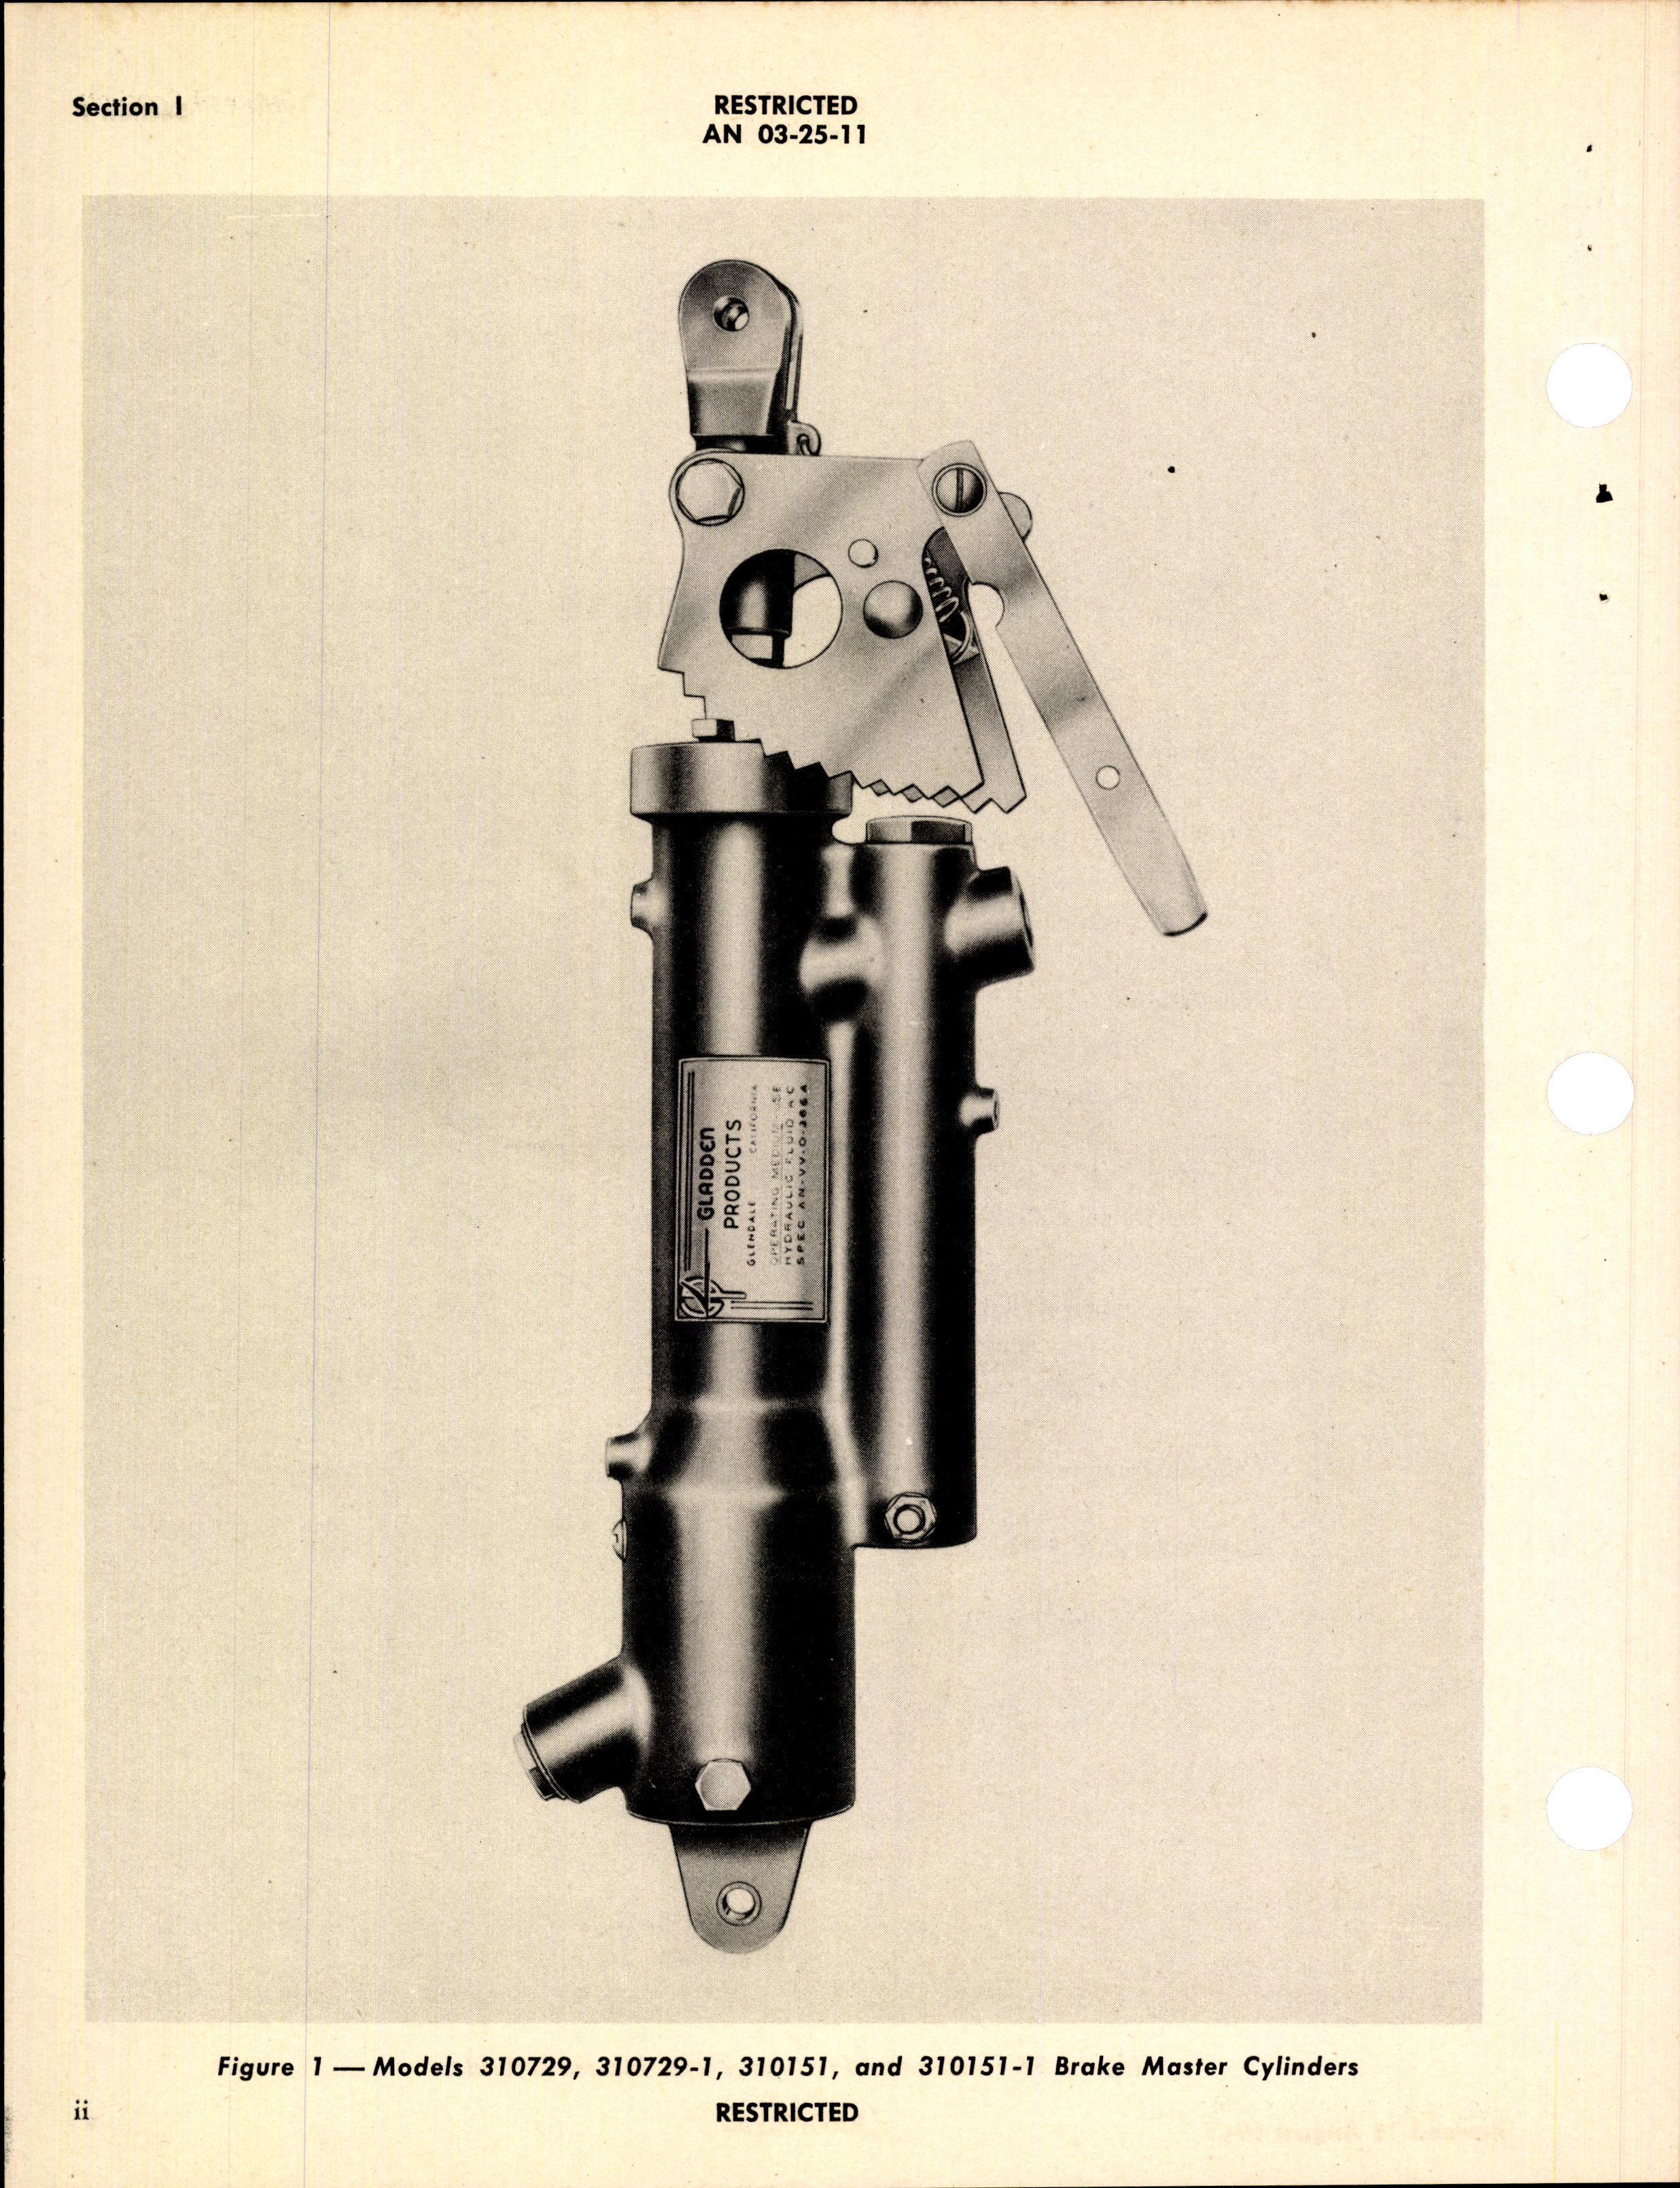 Sample page 6 from AirCorps Library document: Overhaul Instructions with Parts Catalog for Master Brake Cylinders